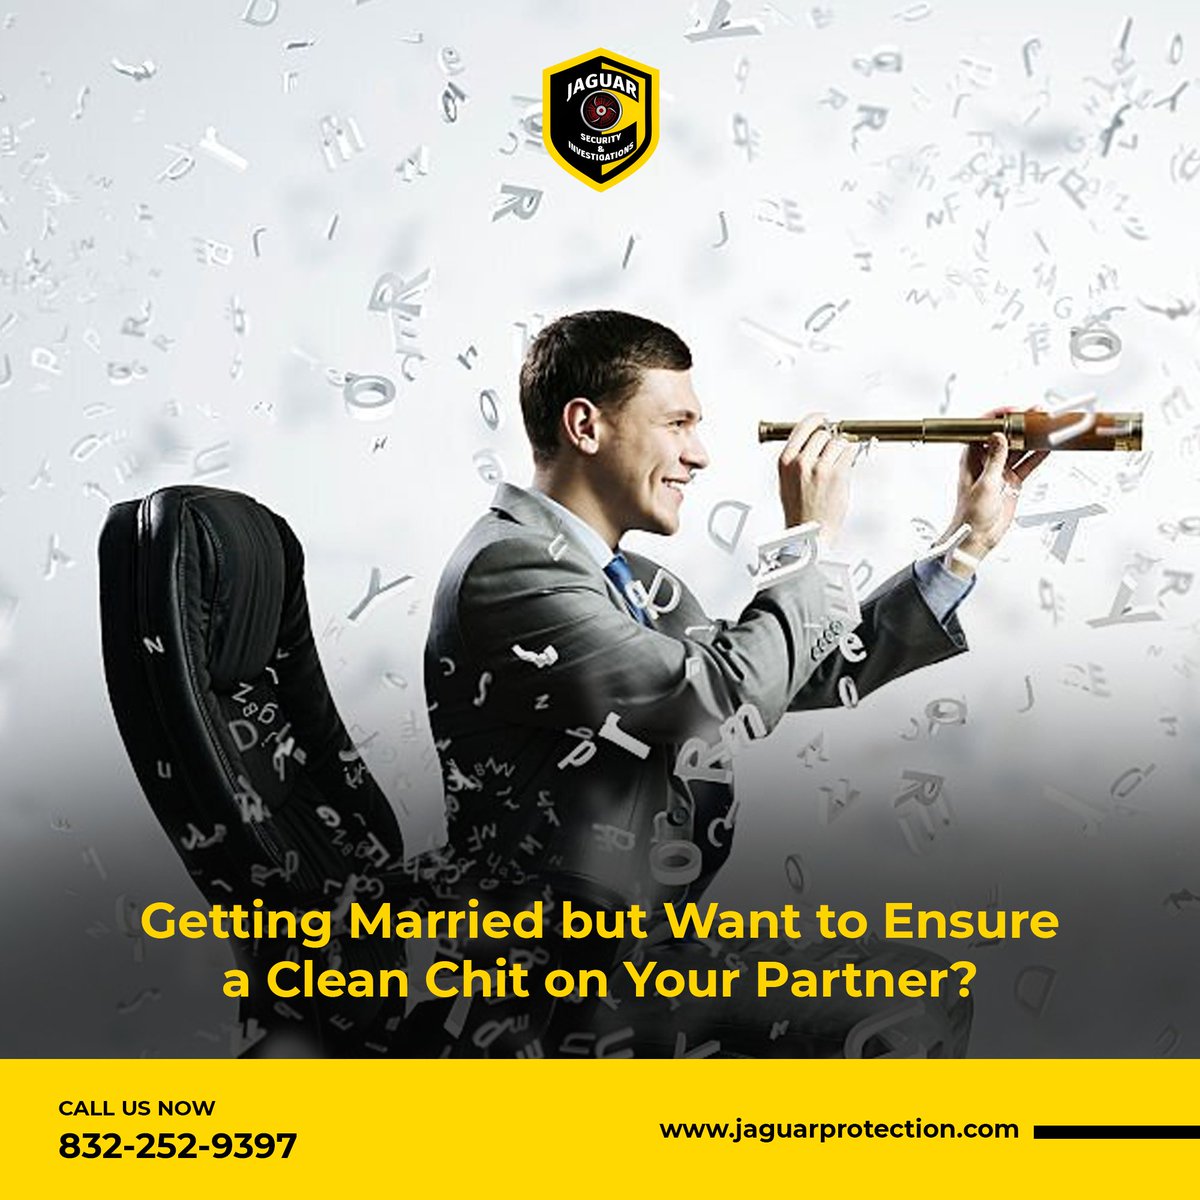 We help you get that or cross-check your partner to ensure your safety.

To get a quote please connect here: jaguarprotection.com/contact-us/

#jaguarprotection #premaritalscreening